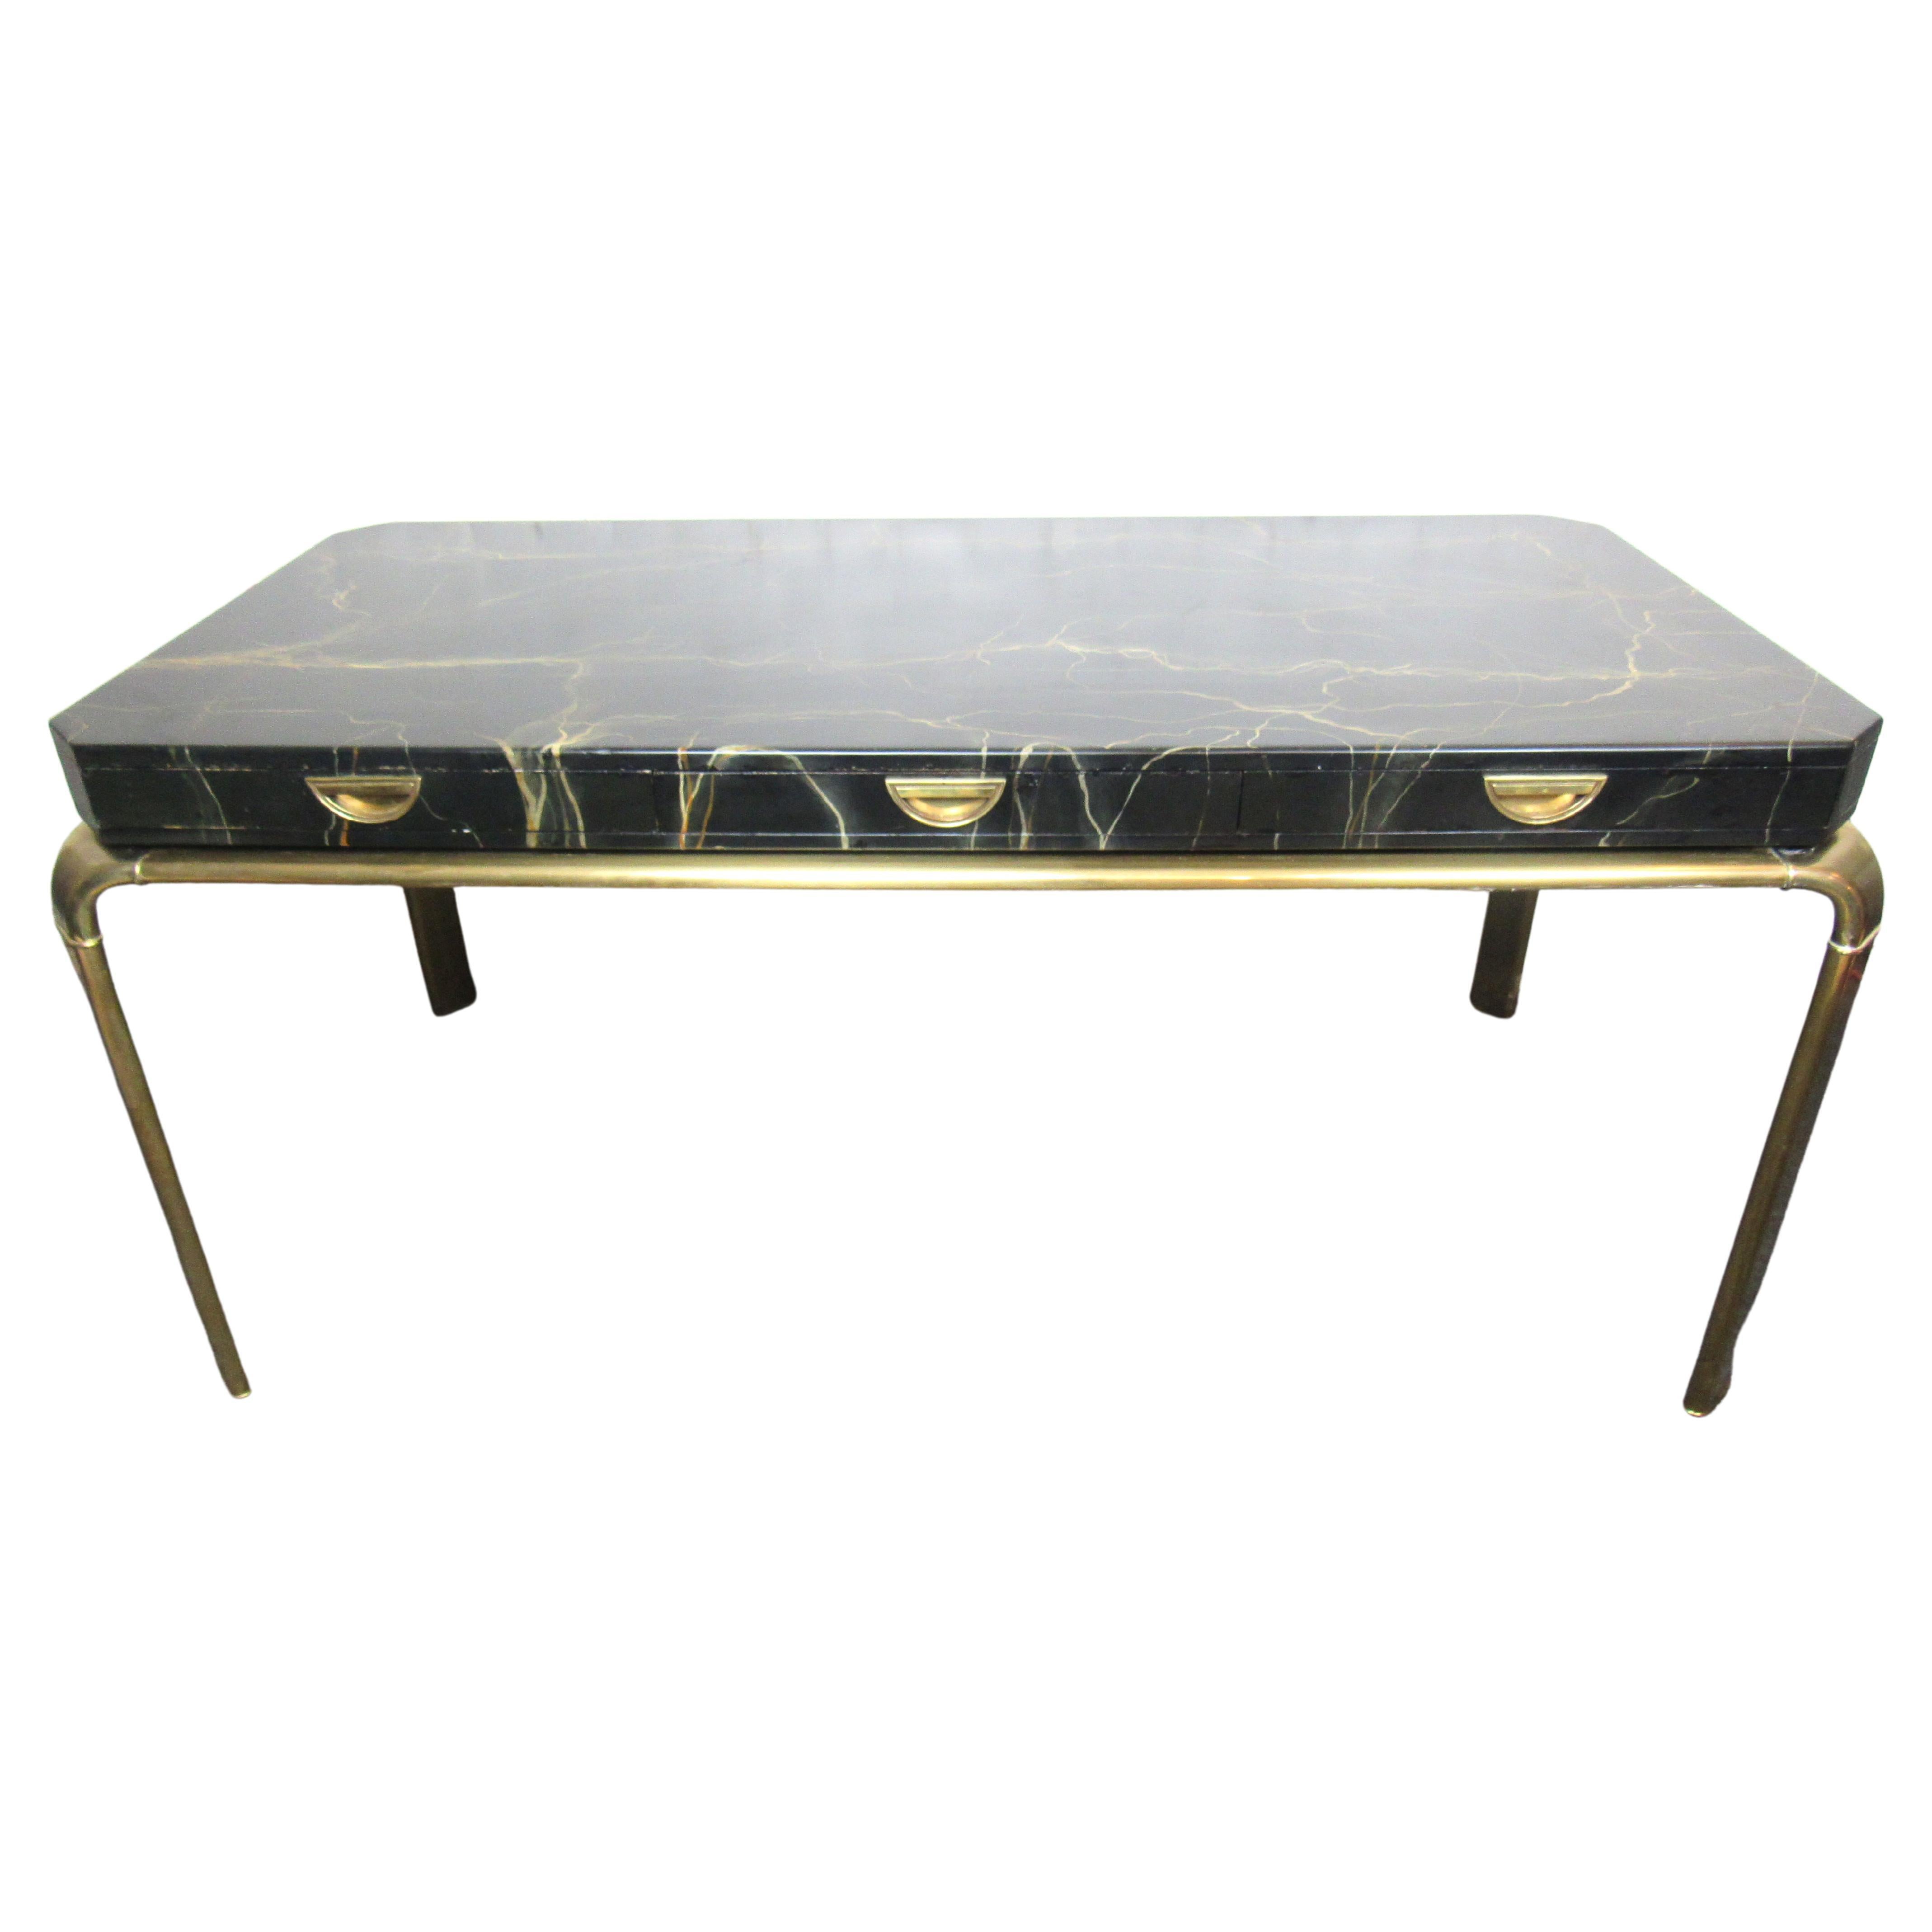 Lacquered Brass Executive Desk by Mastercraft for John Widdicomb